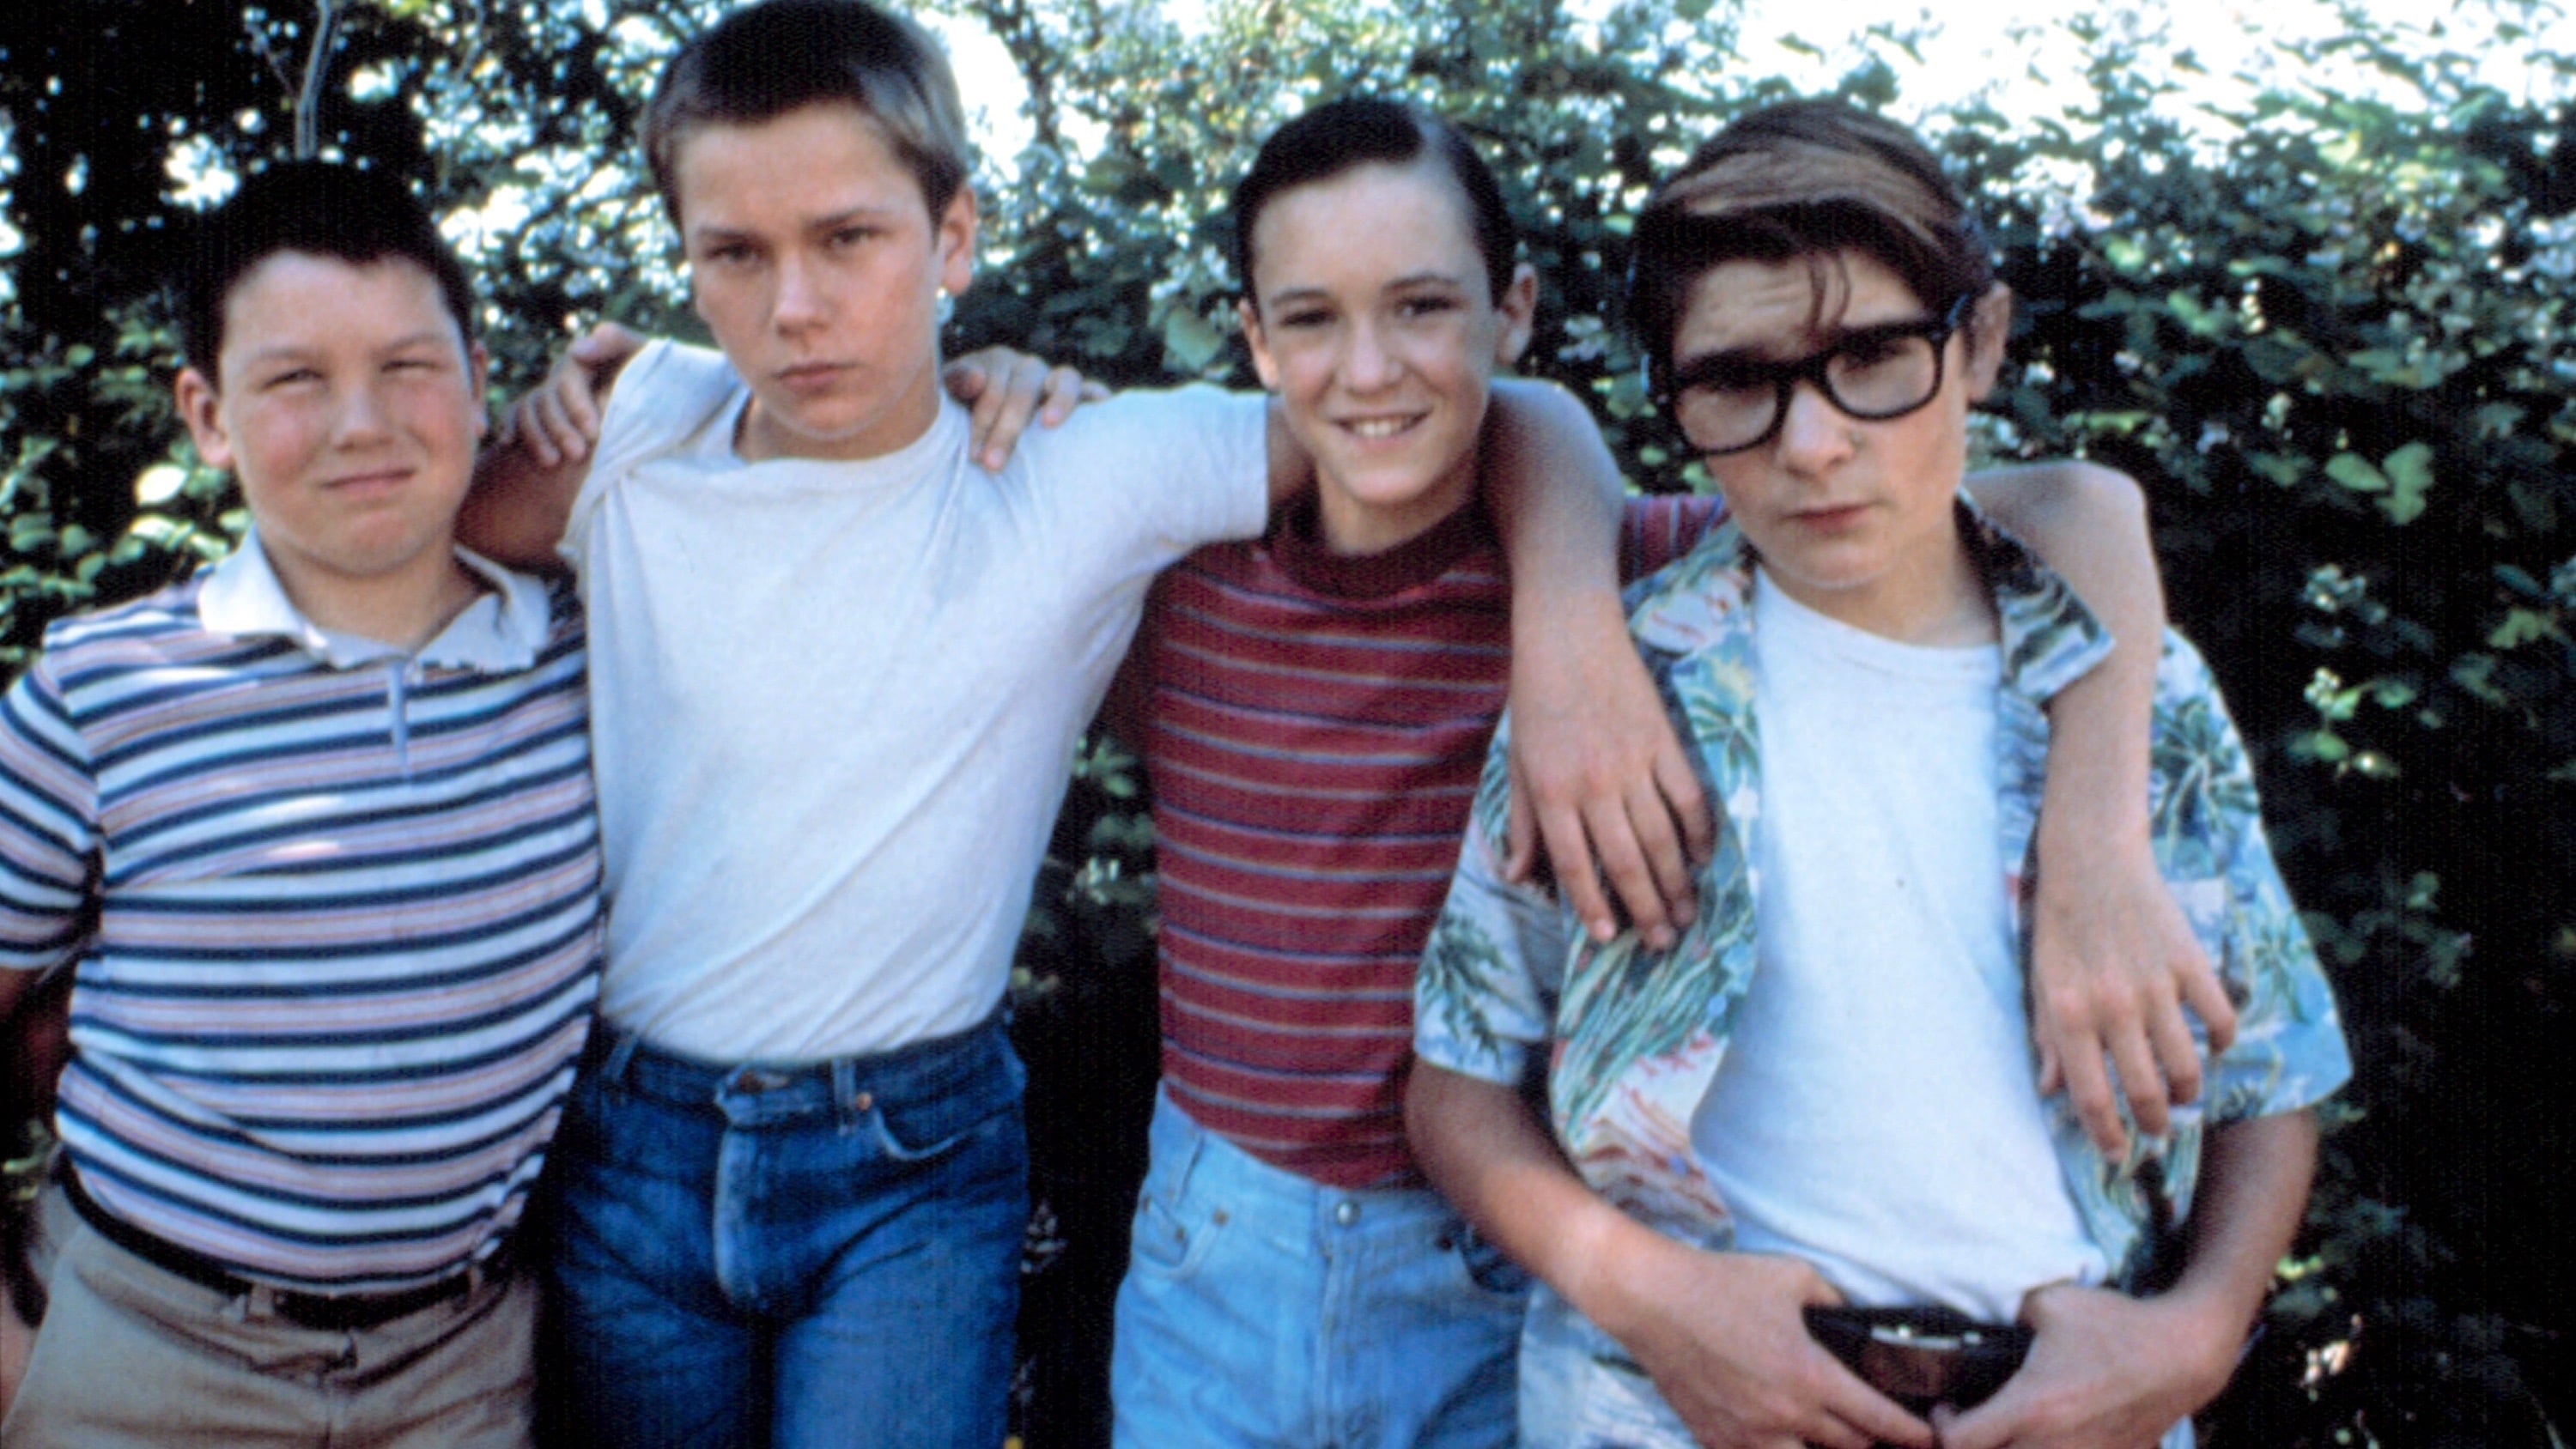 Image du film Stand by Me 5eougpua00yz97v4wvgihyyvix1jpg